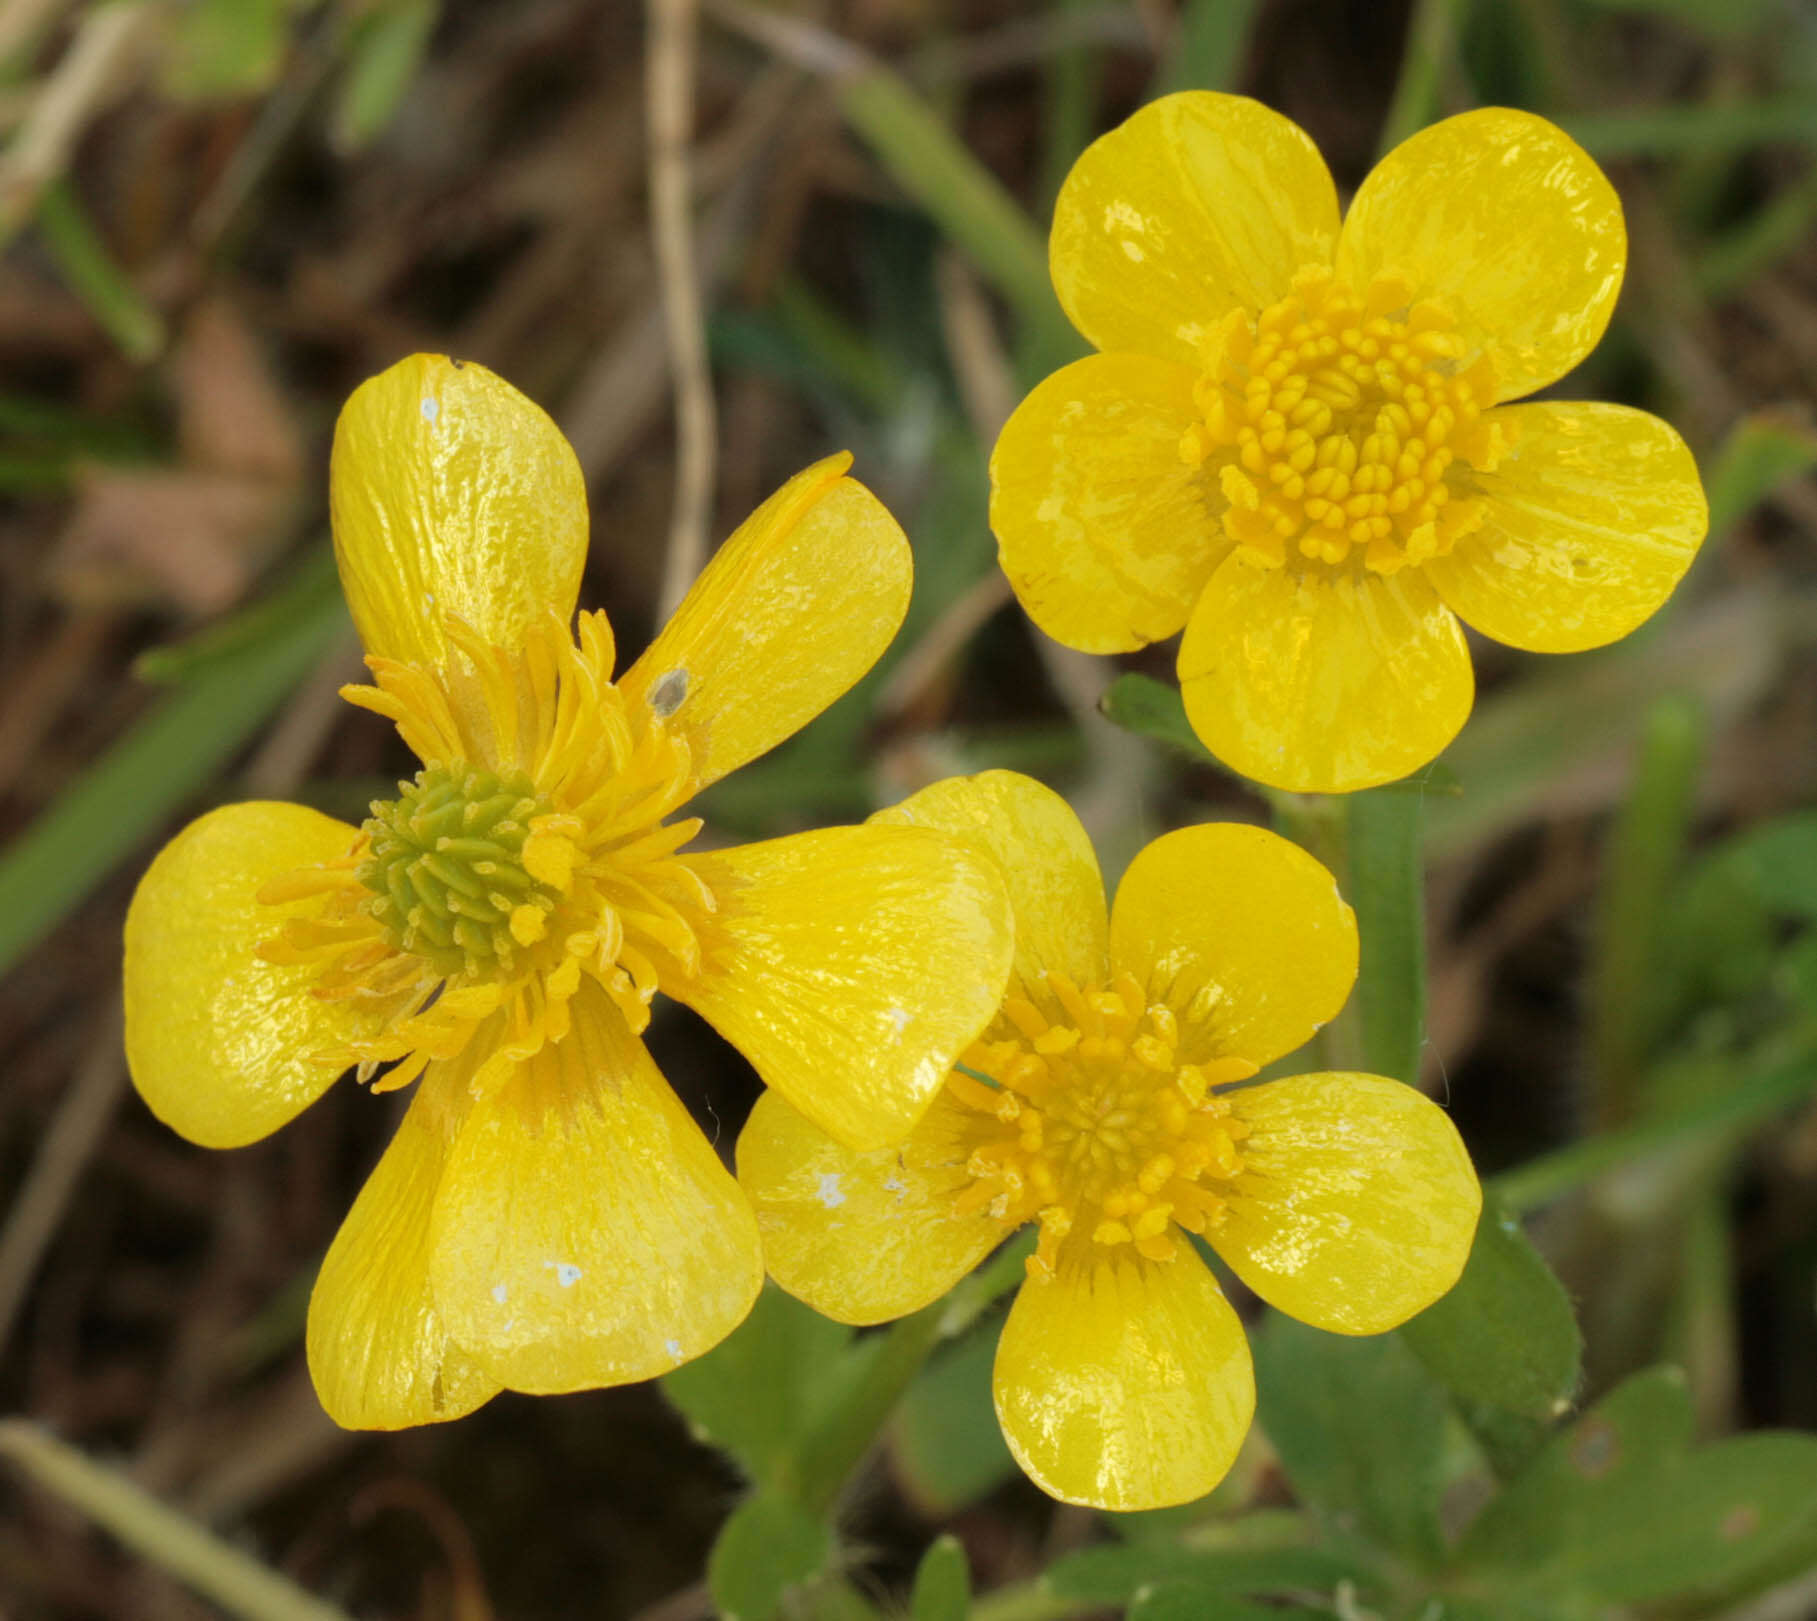 Image of hairy buttercup